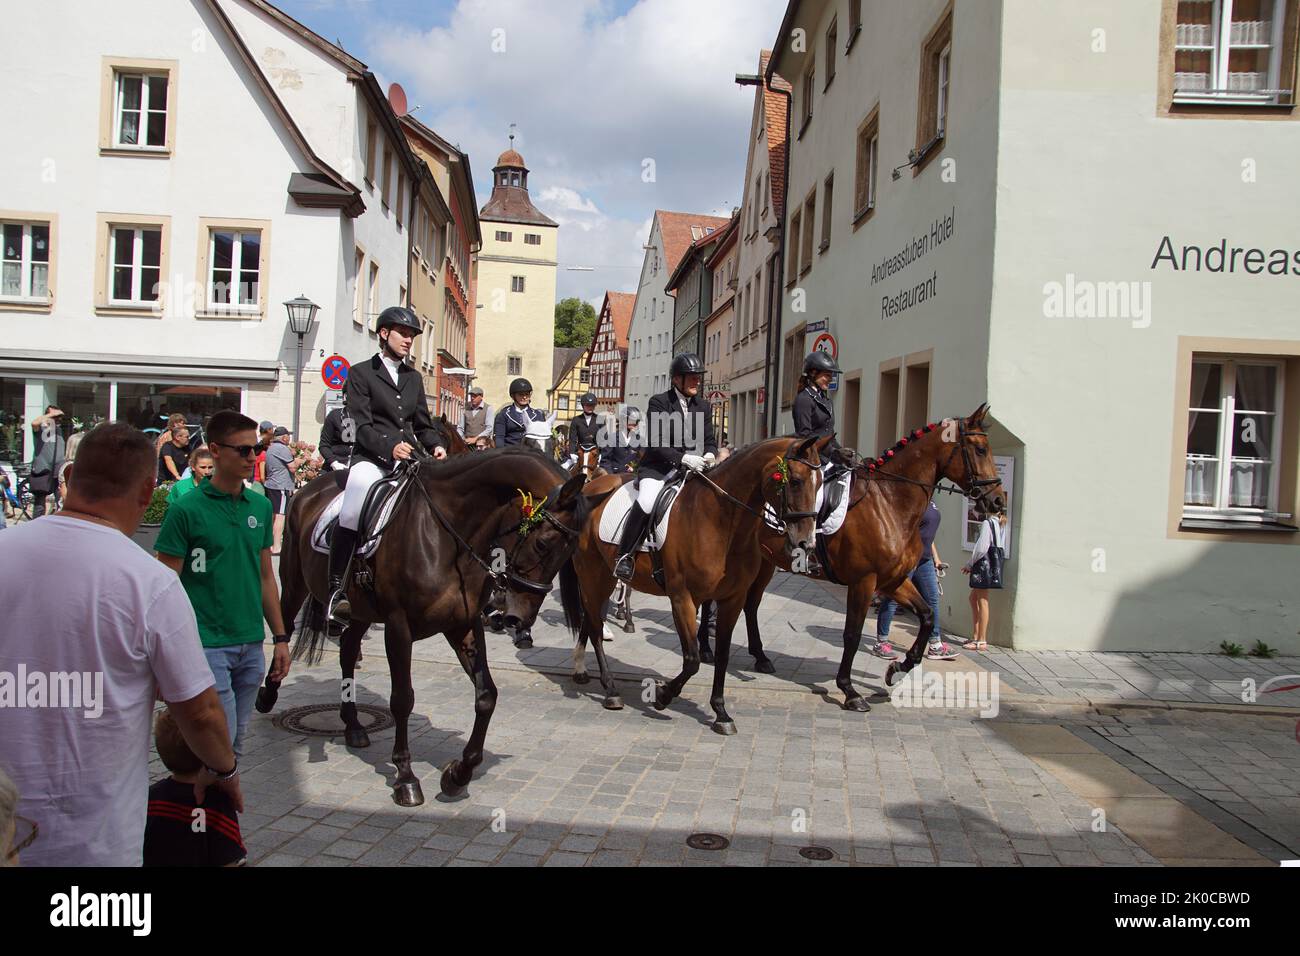 Parade after the festival, called Kirchweih in the German city of Weissenburgh in the Ellinger Strasse. Riders on horses. August Stock Photo